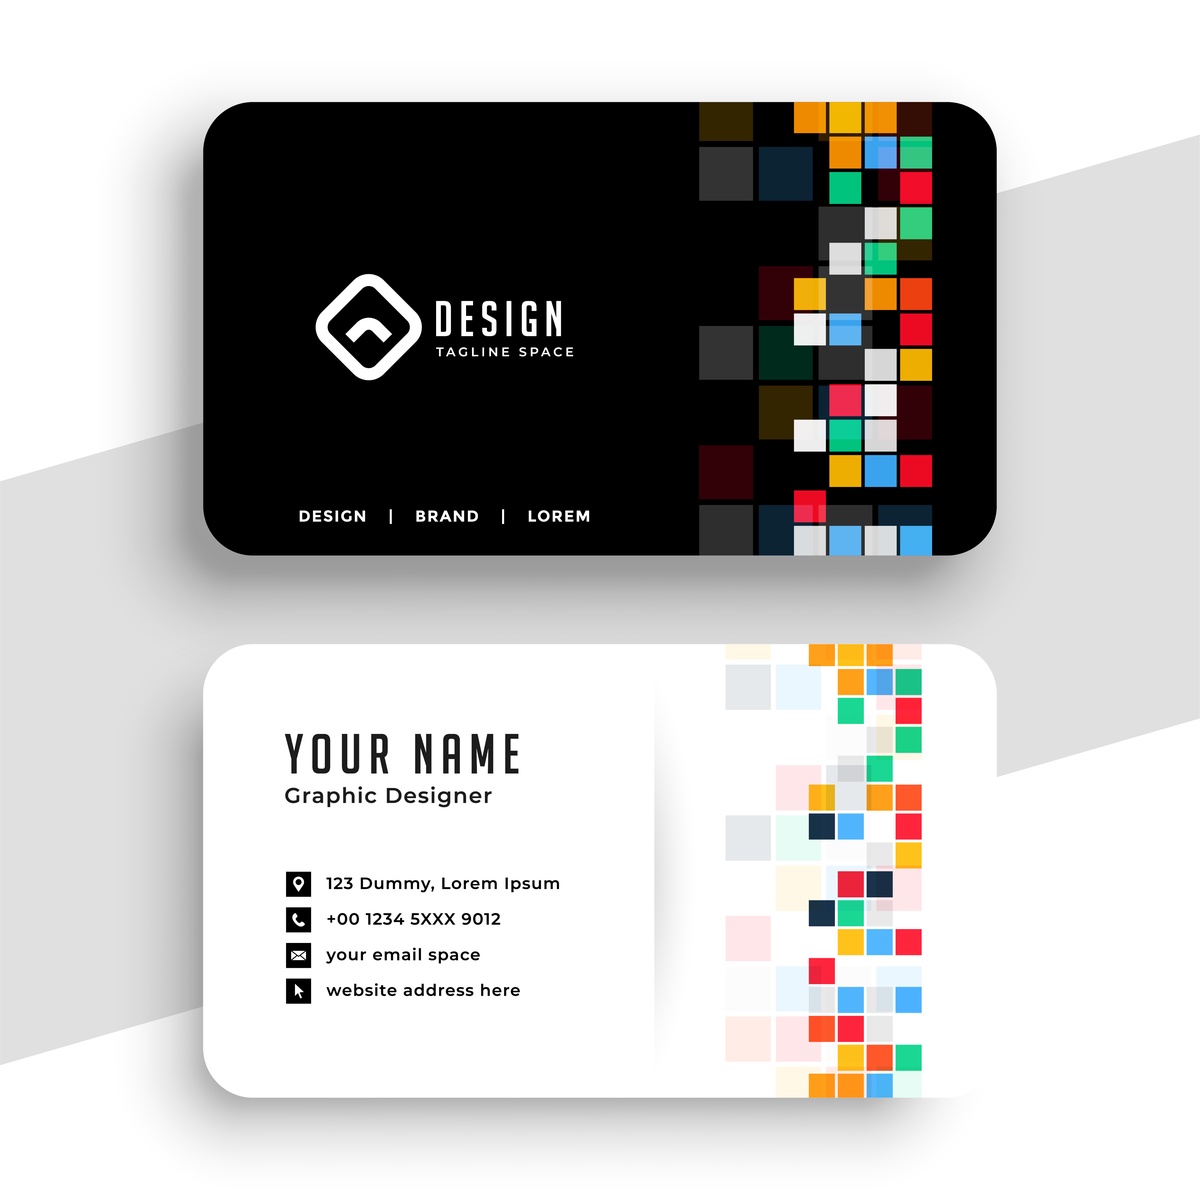 How a Business Card Can Transform Your Brand Presentation?